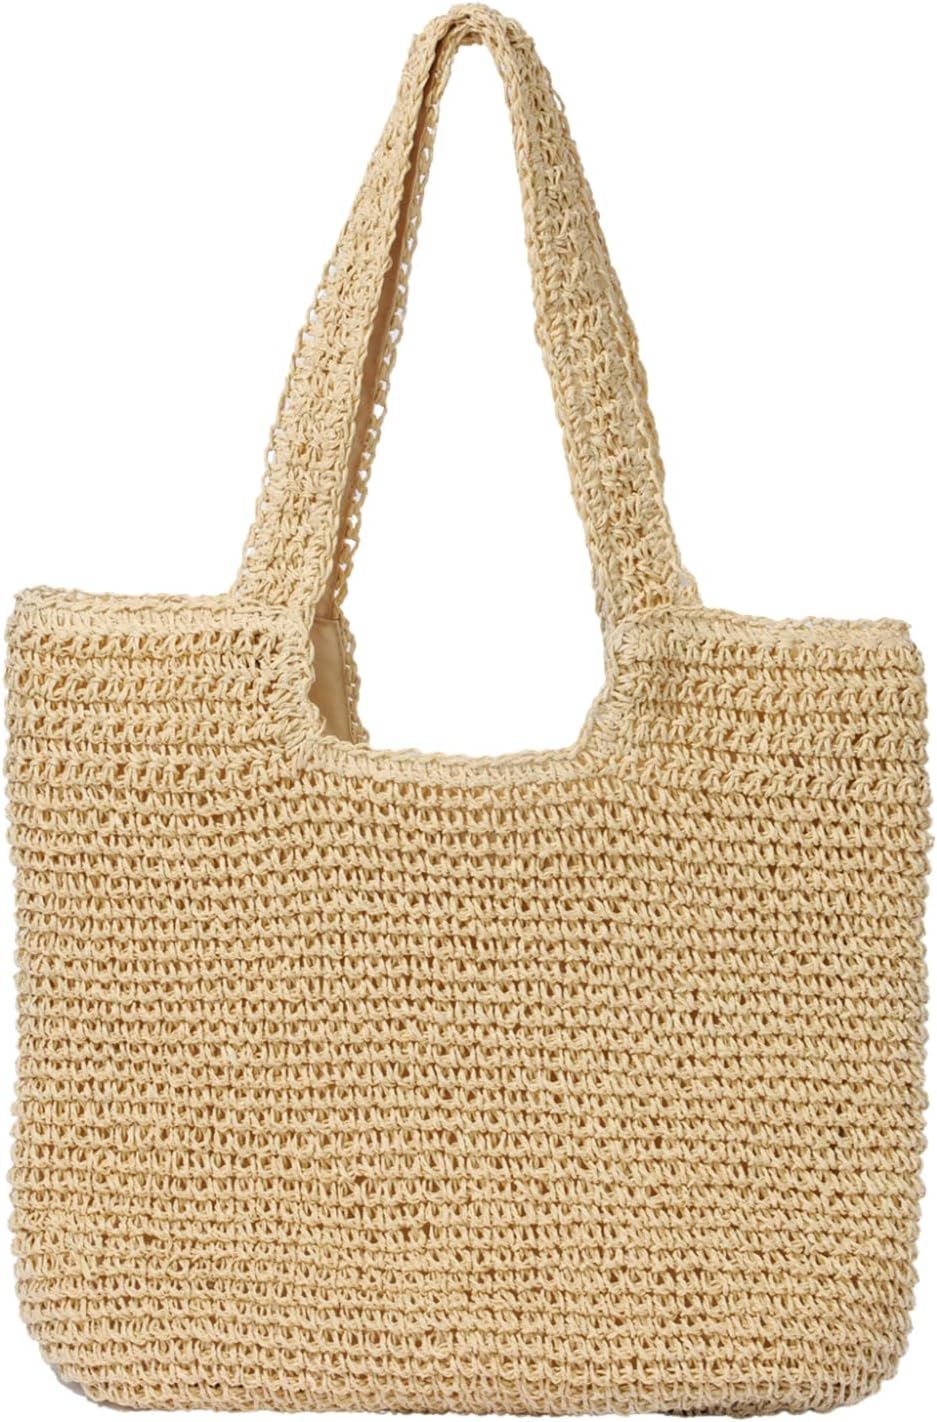 Beach Bags for Women - Summer Soft Large Woven Shoulder Purse Handbag, Beach Tote Straw Bag for S... | Amazon (US)